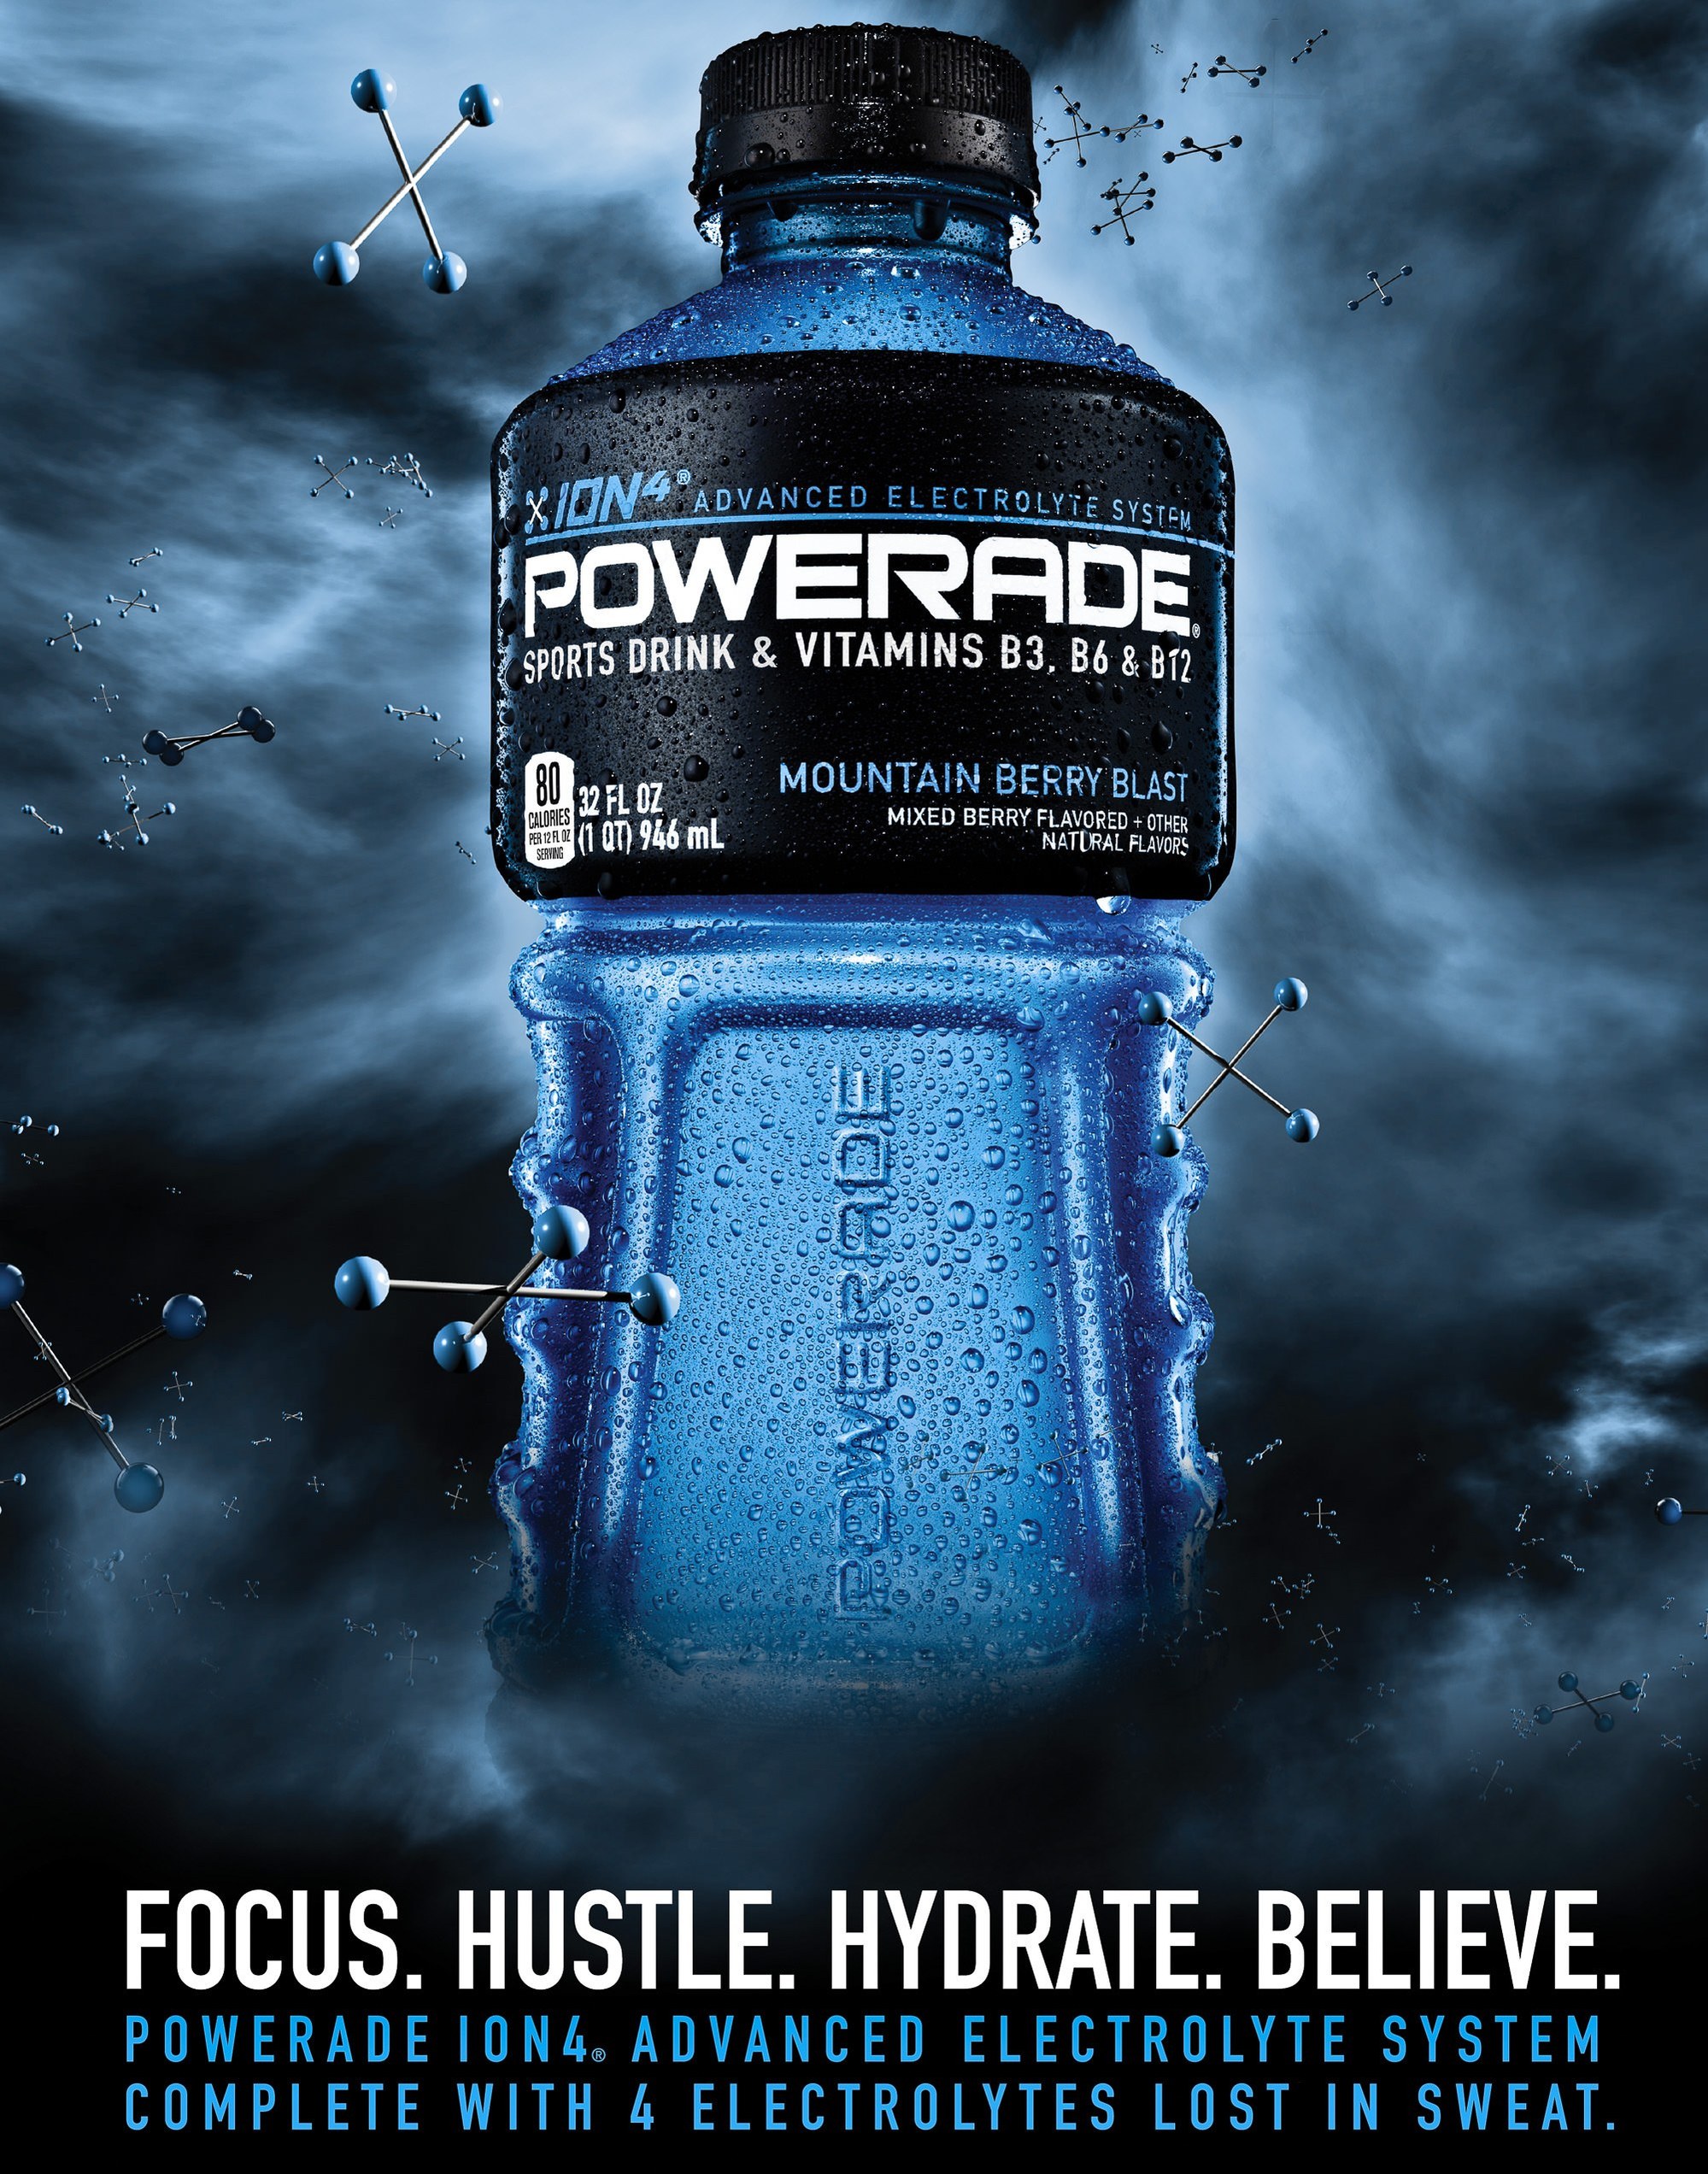 Powerade drink beverage  campaign Photography by commercial, product & advertising photographer Timothy Hogan in studio Los Angeles